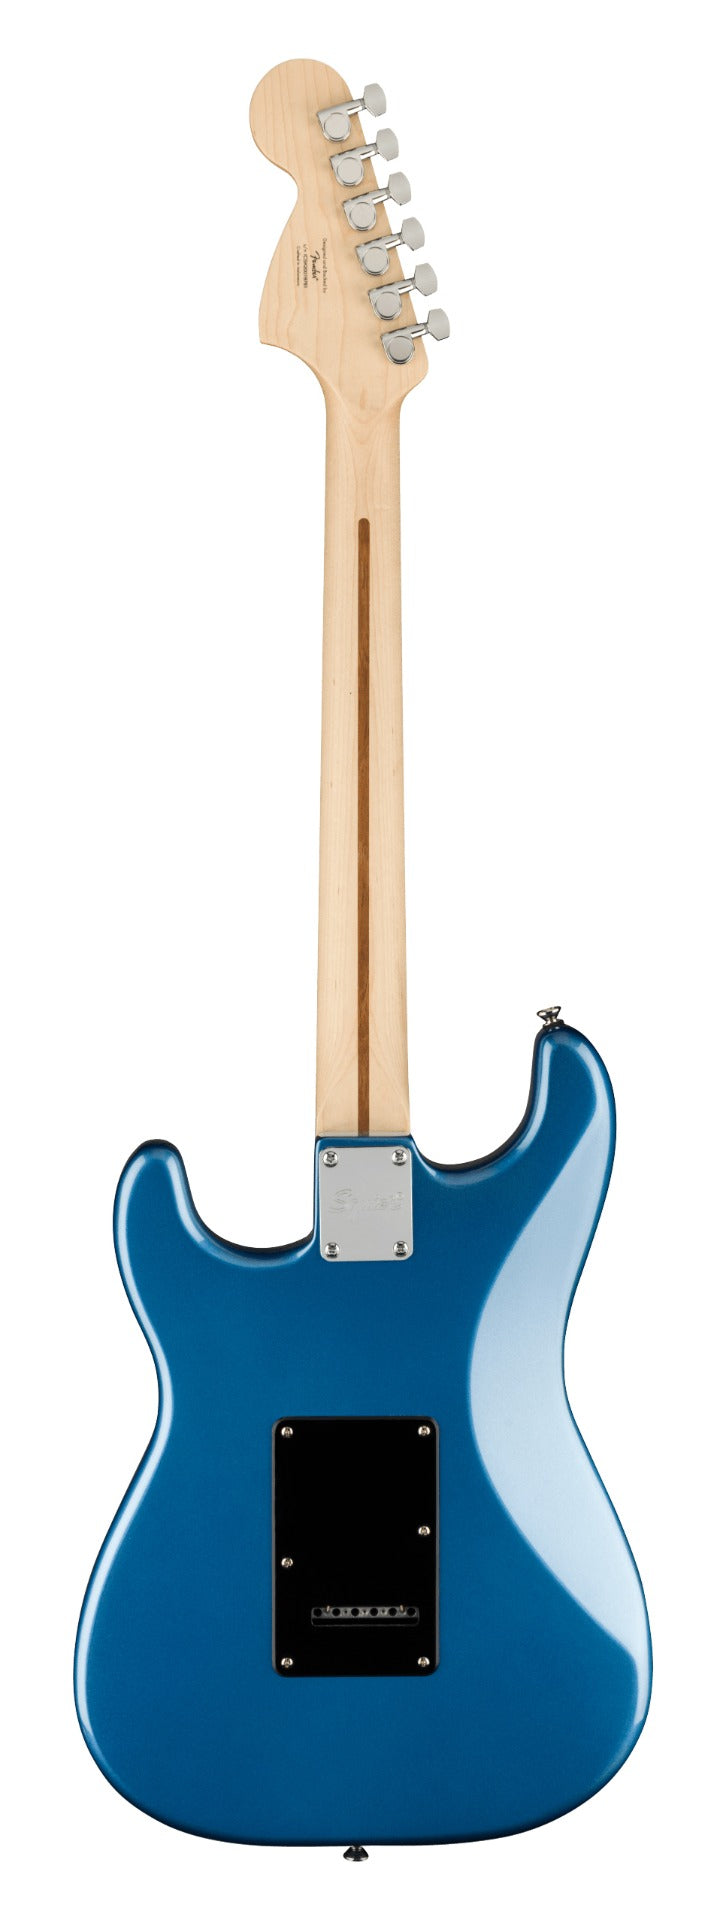 Squier Affinity Series Stratocaster in Lake Placid Blue